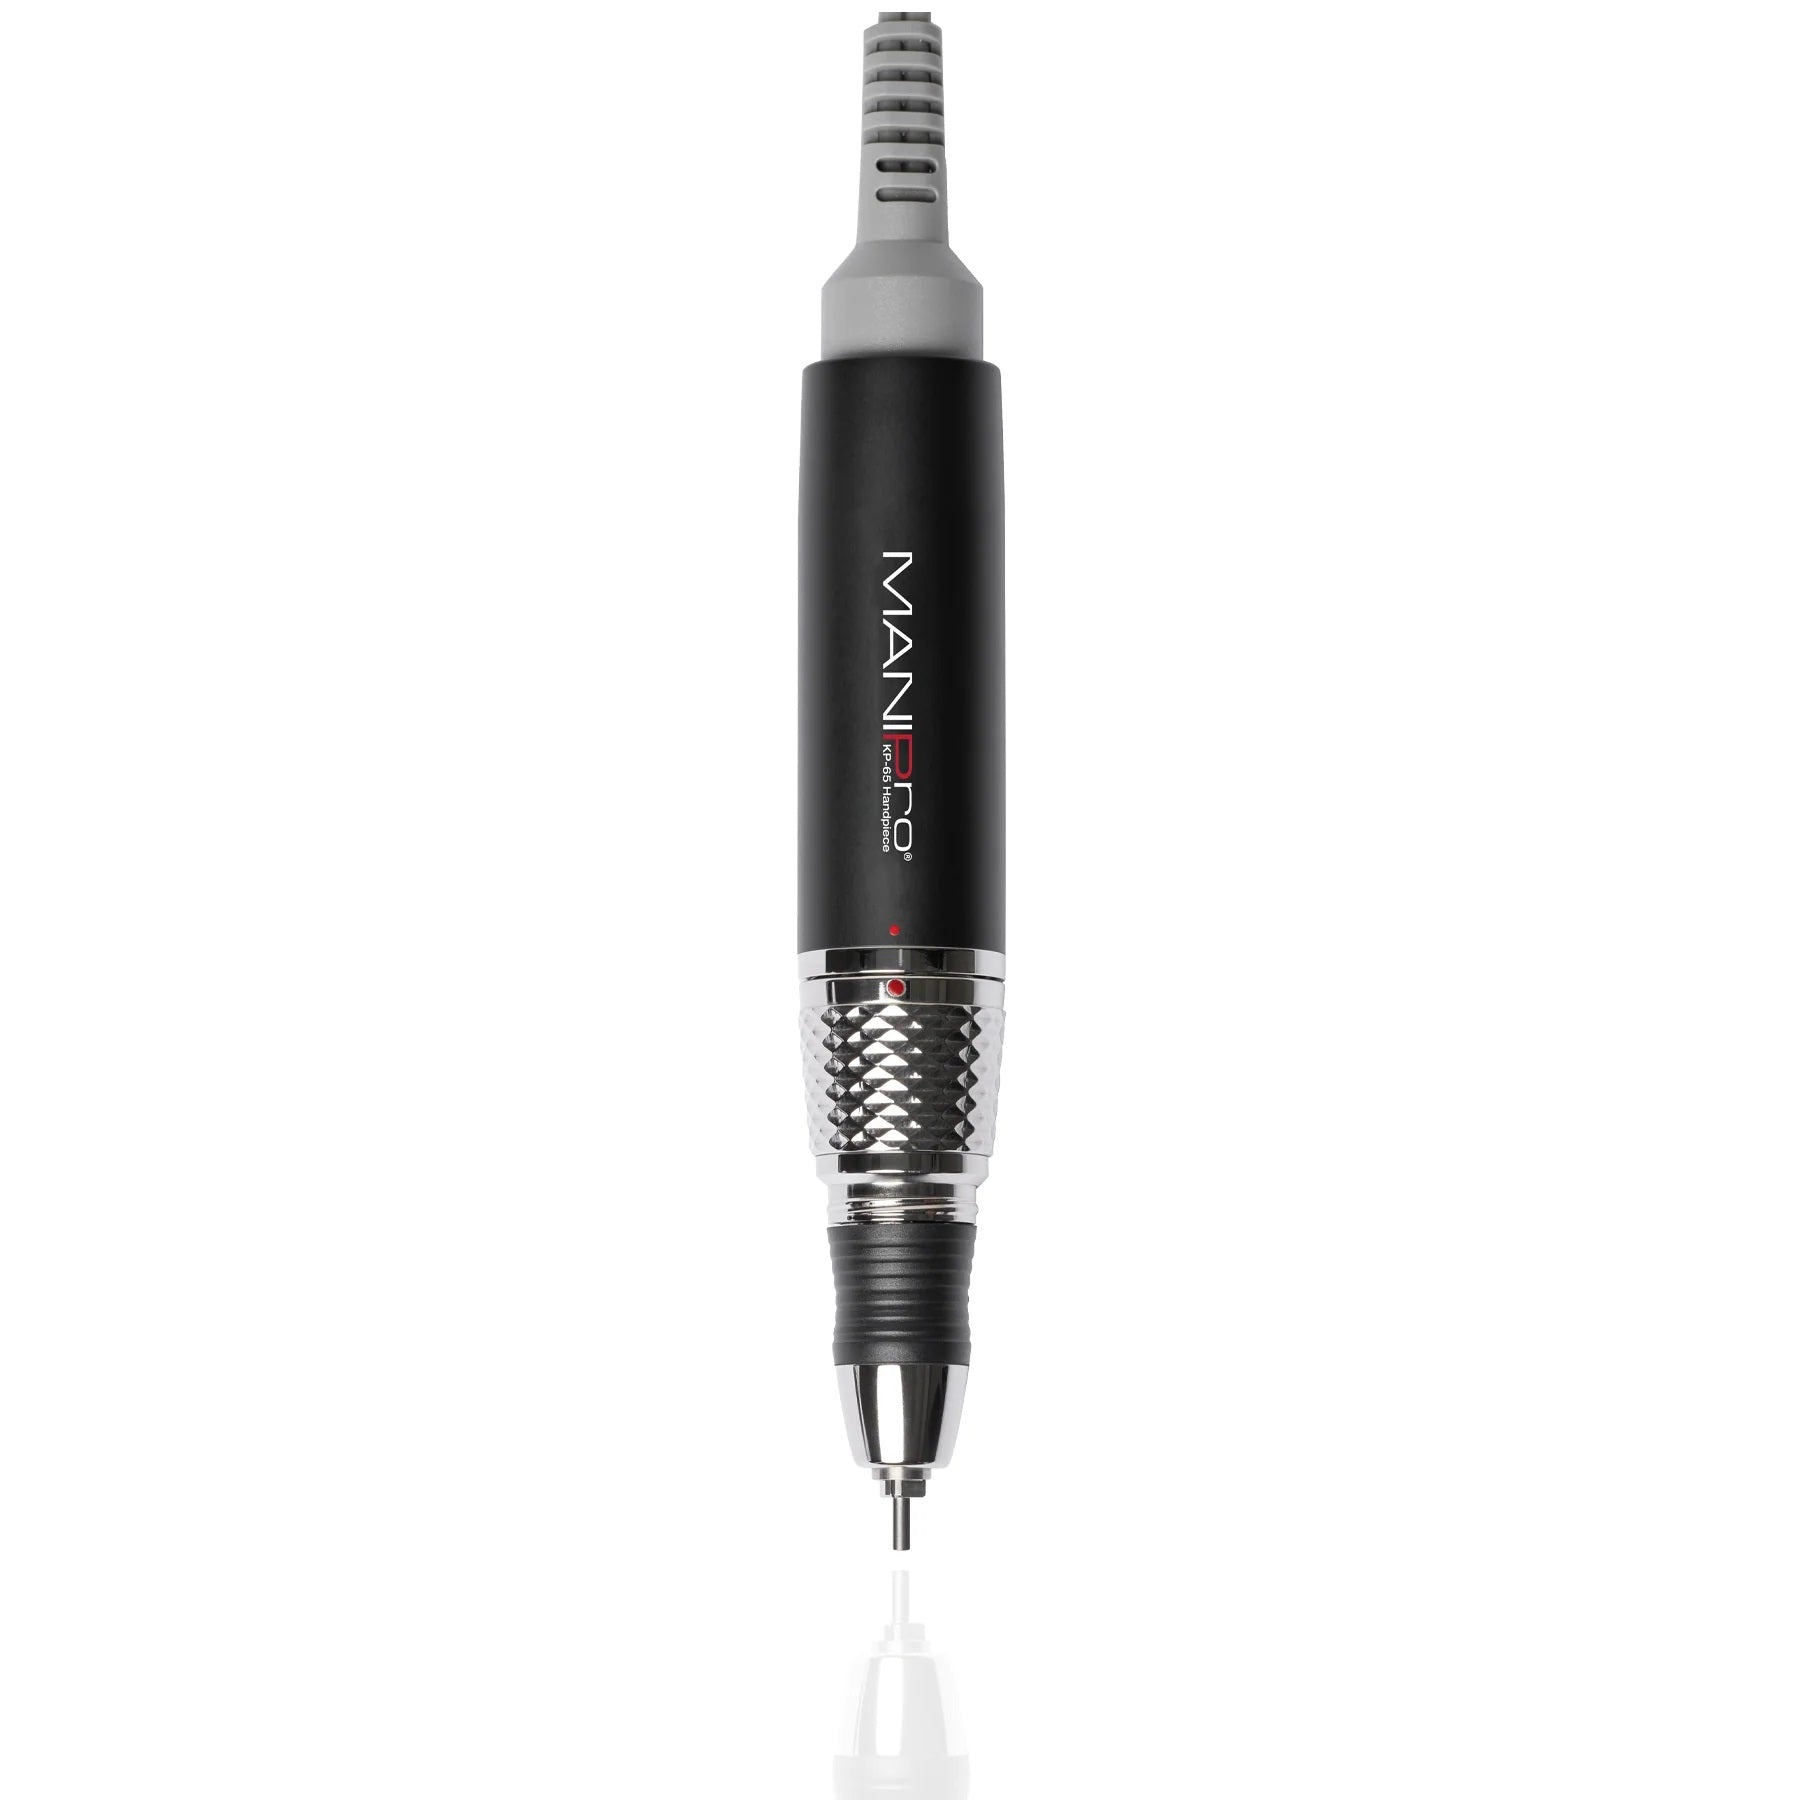 KUPA Passport Nail Drill Complete with Handpiece KP-65 - Cheetah